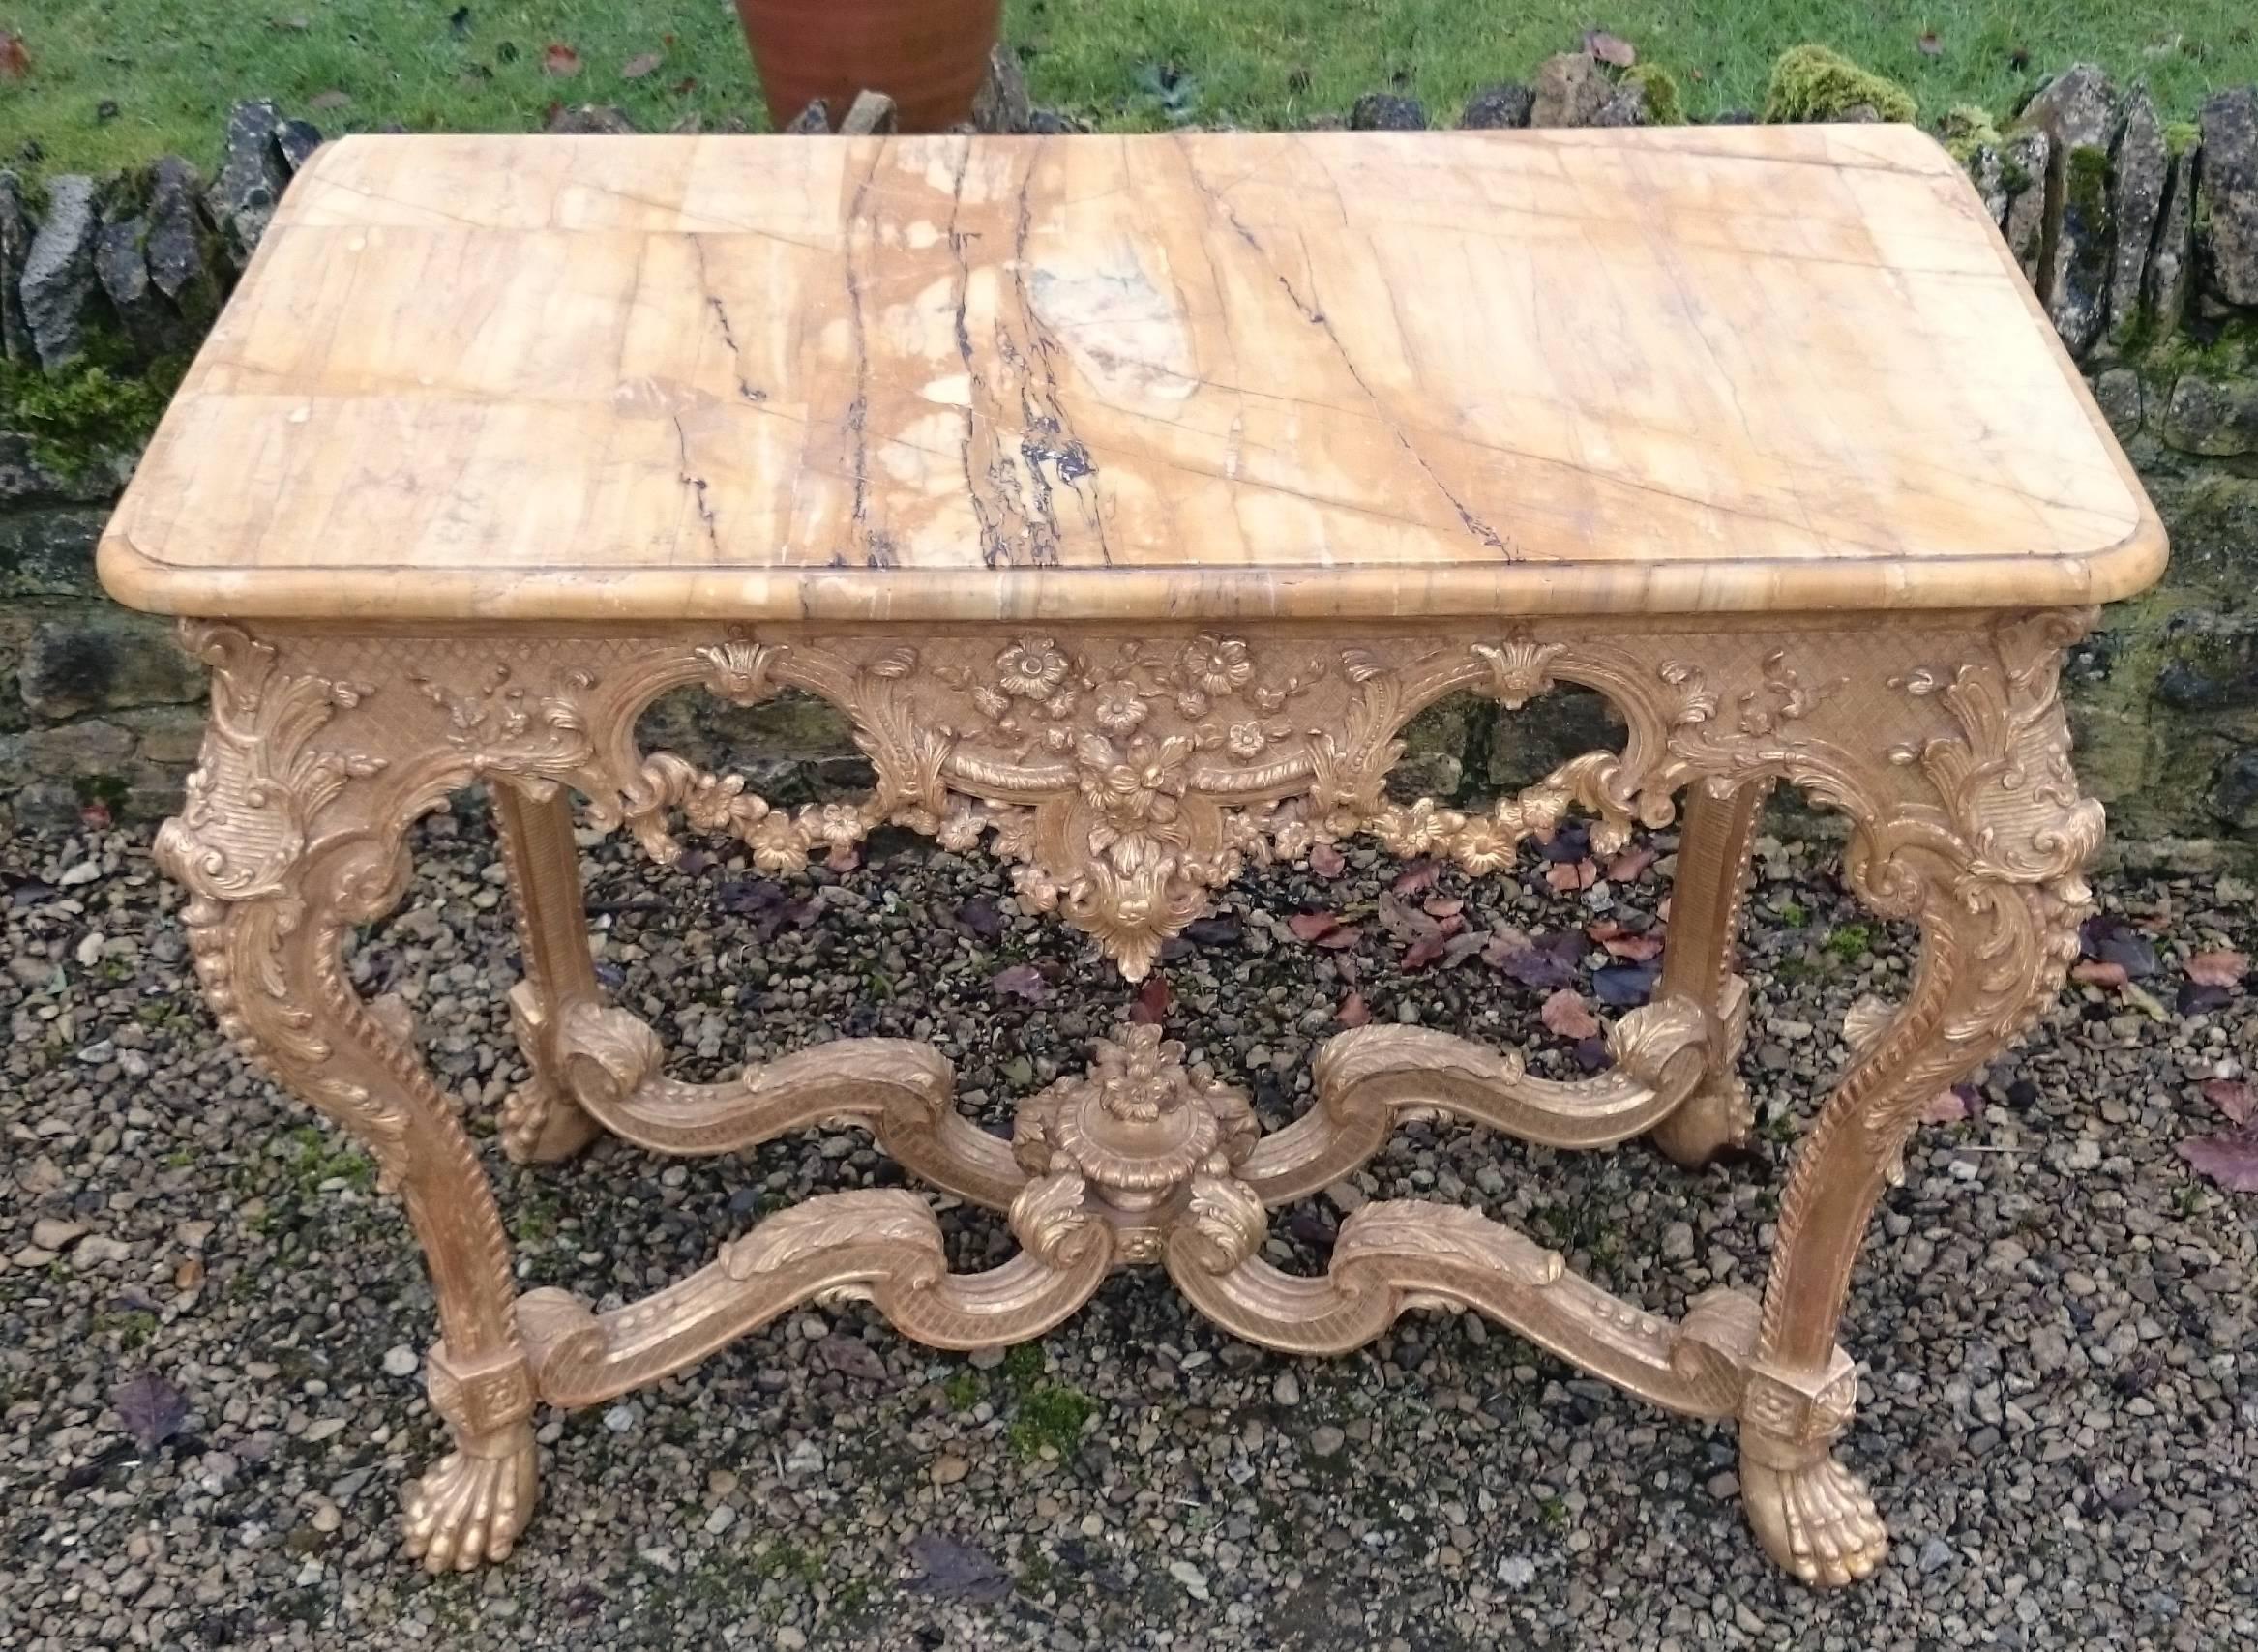 18th century, George II period antique console table. This console table is very finely carved and decorated in the Rococo manner, with garlands of flowers, scrolls and generously shape to the cabriole legs, lower stretchers and frieze. The later